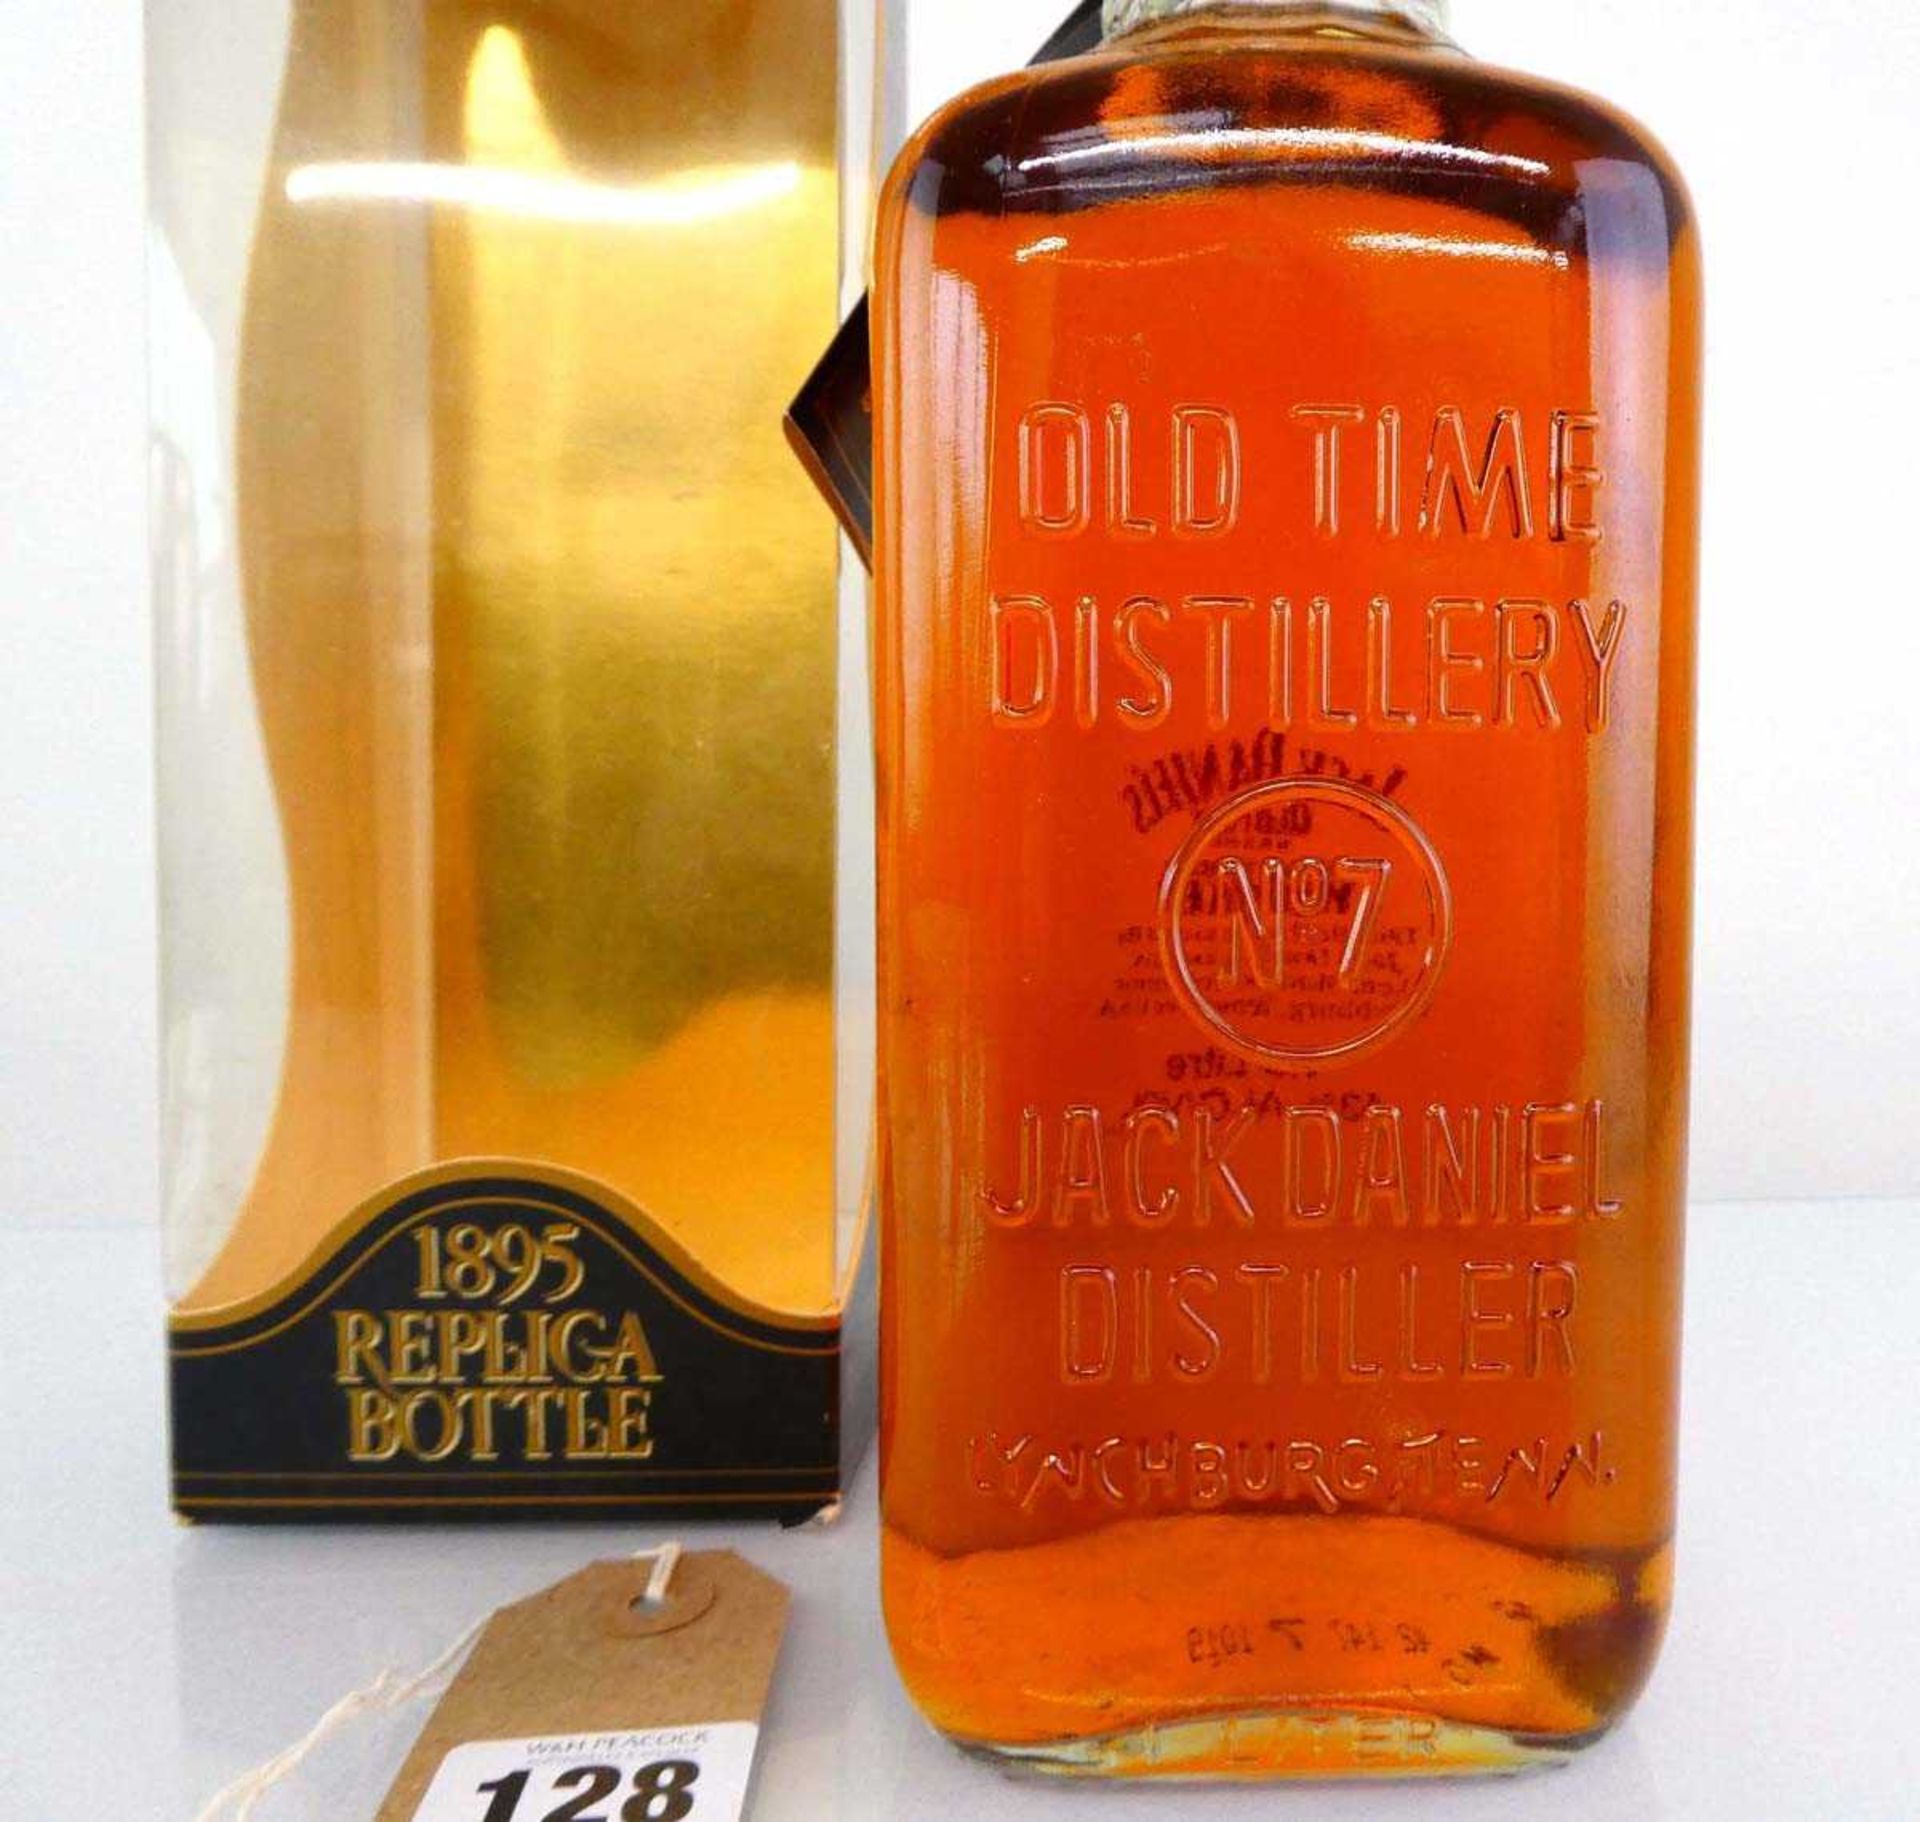 A bottle of Jack Daniel's Old No.7 1895 Replica bottle Old Time Tennessee Whiskey with box, circa - Image 2 of 3